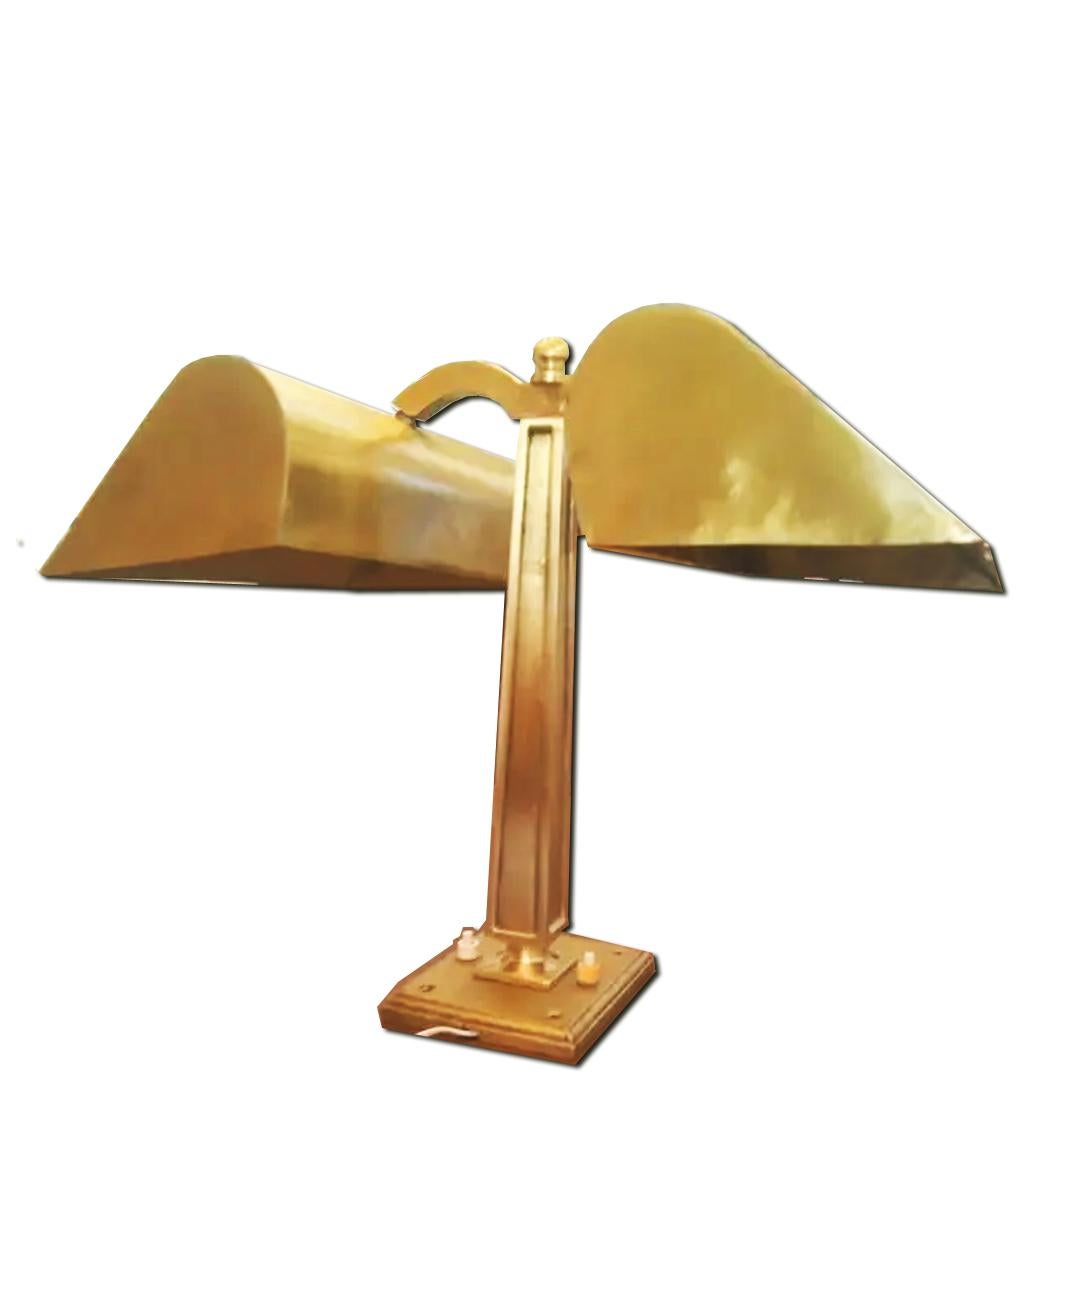 Art Deco Double Brass Banker Desk or Library Lamp, Early 20th Century